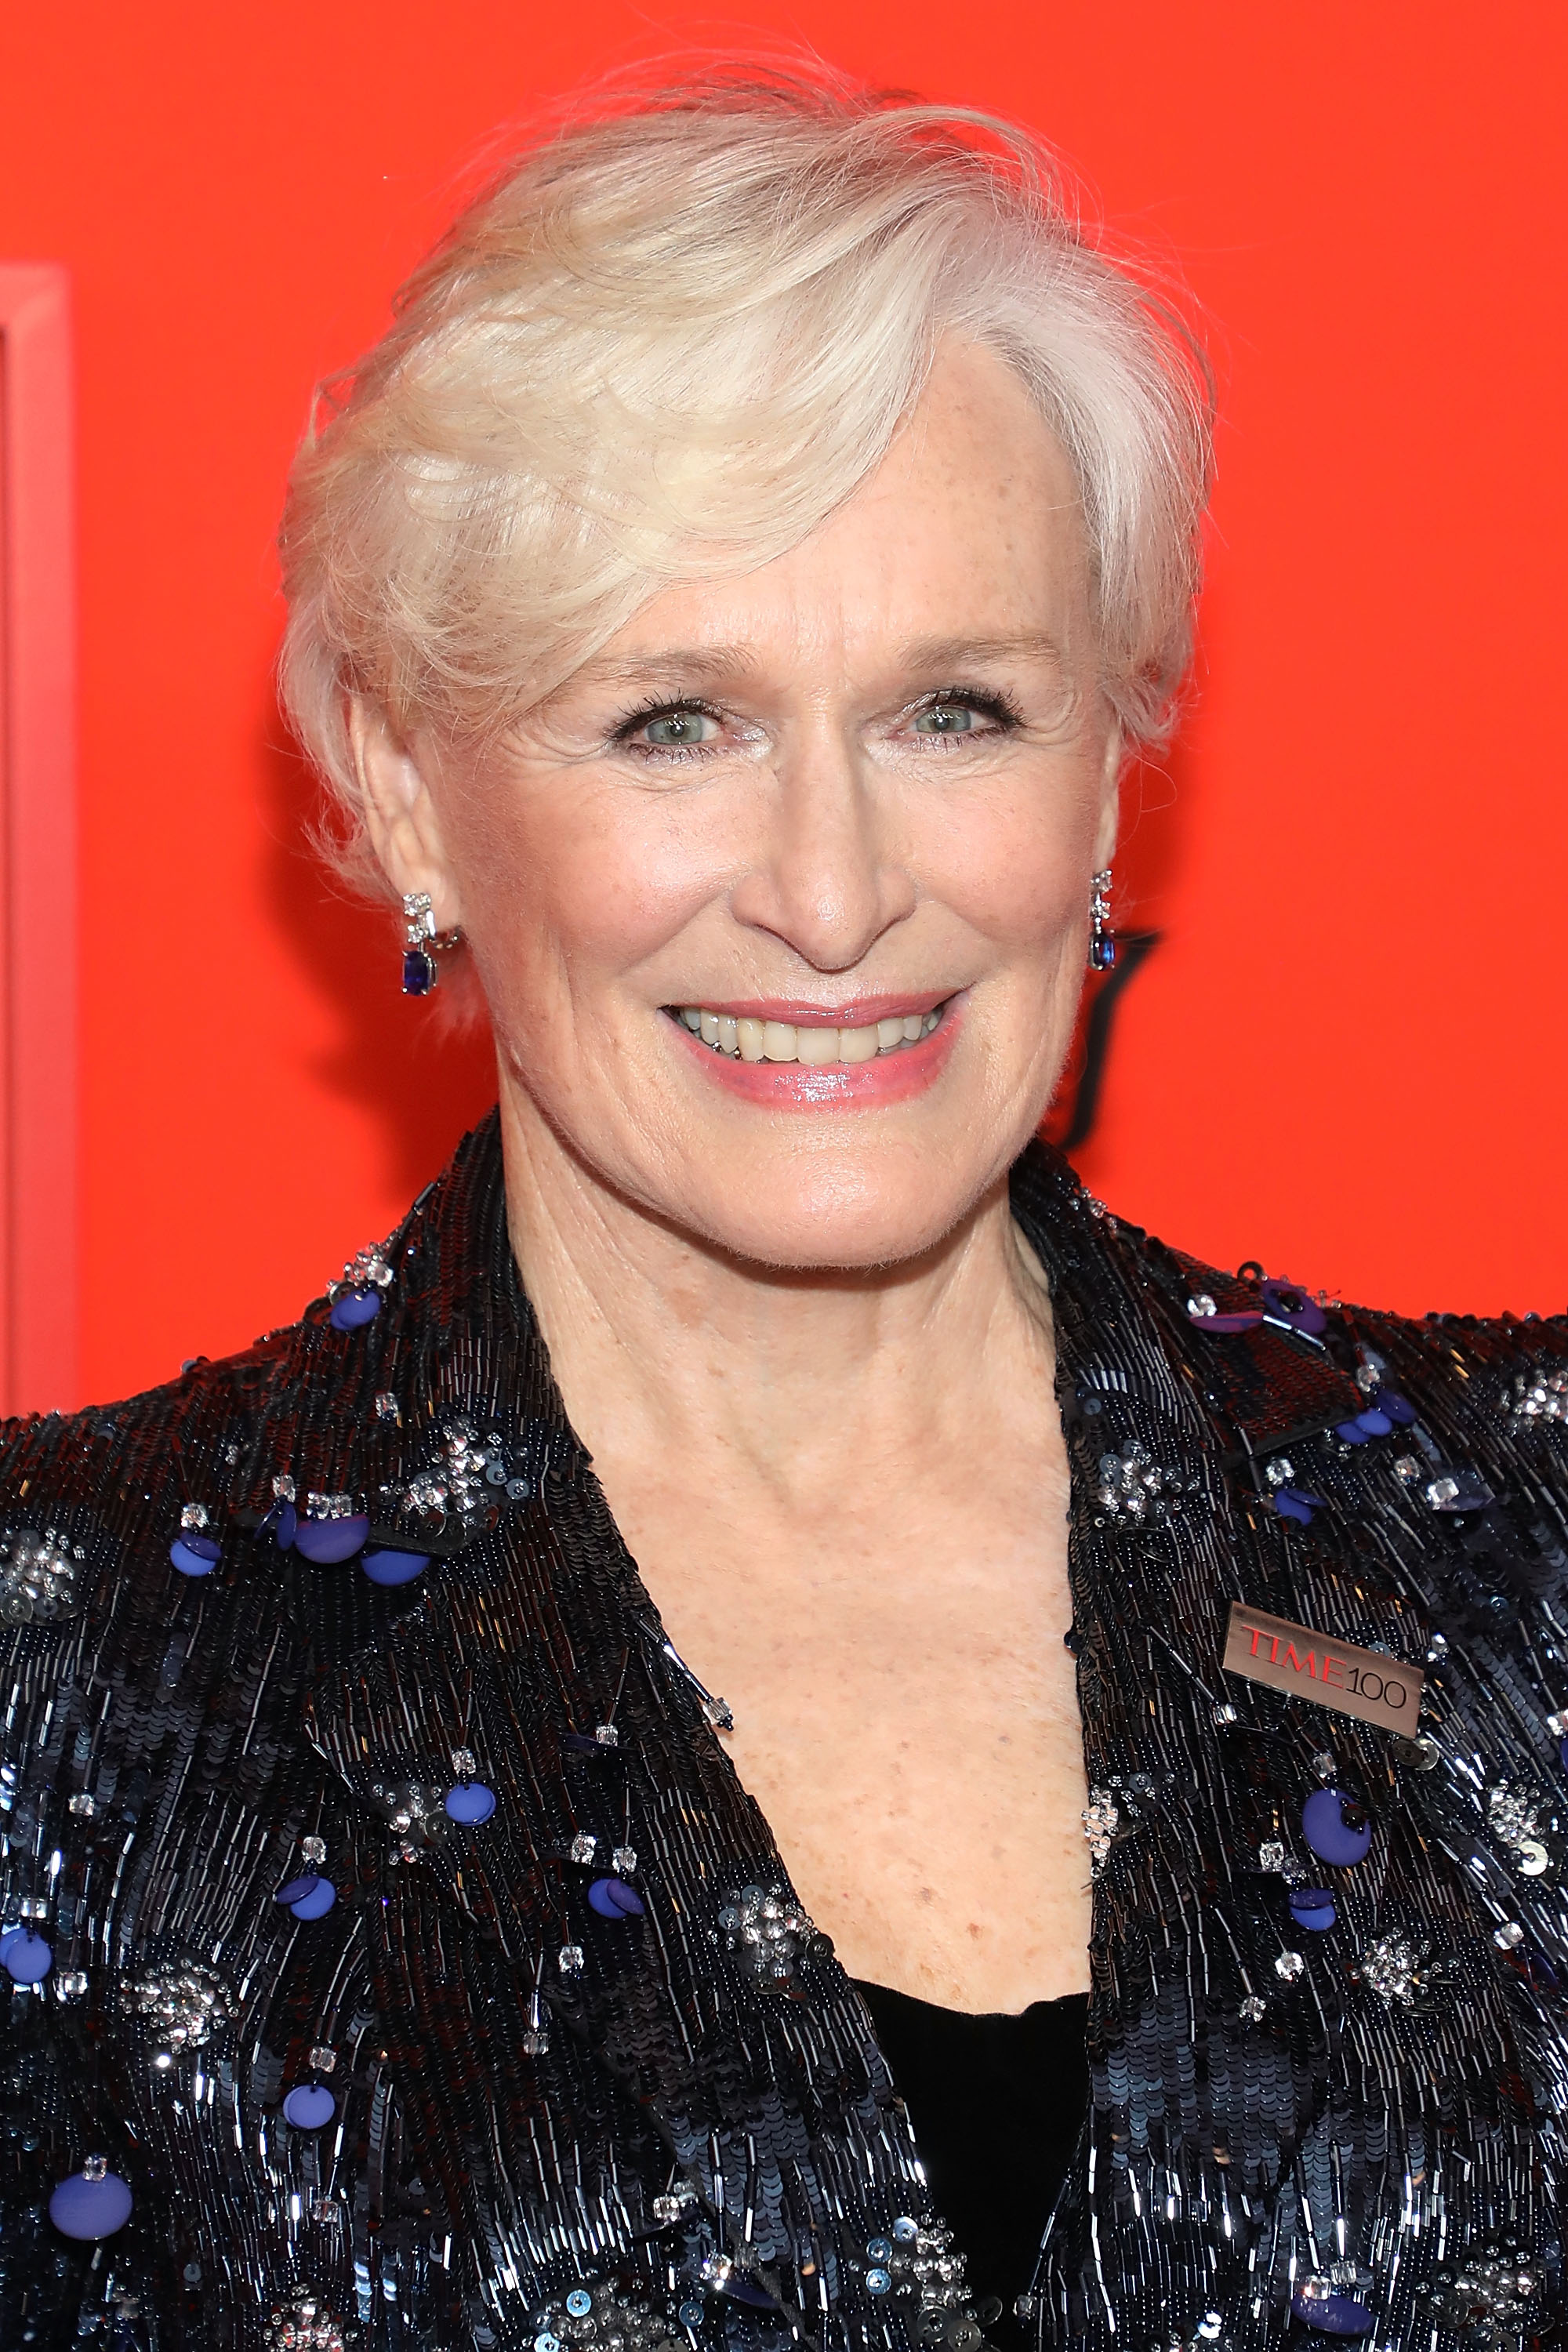 Glenn Close at the Time 100 Gala in New York City on April 23, 2019 | Source: Getty Images